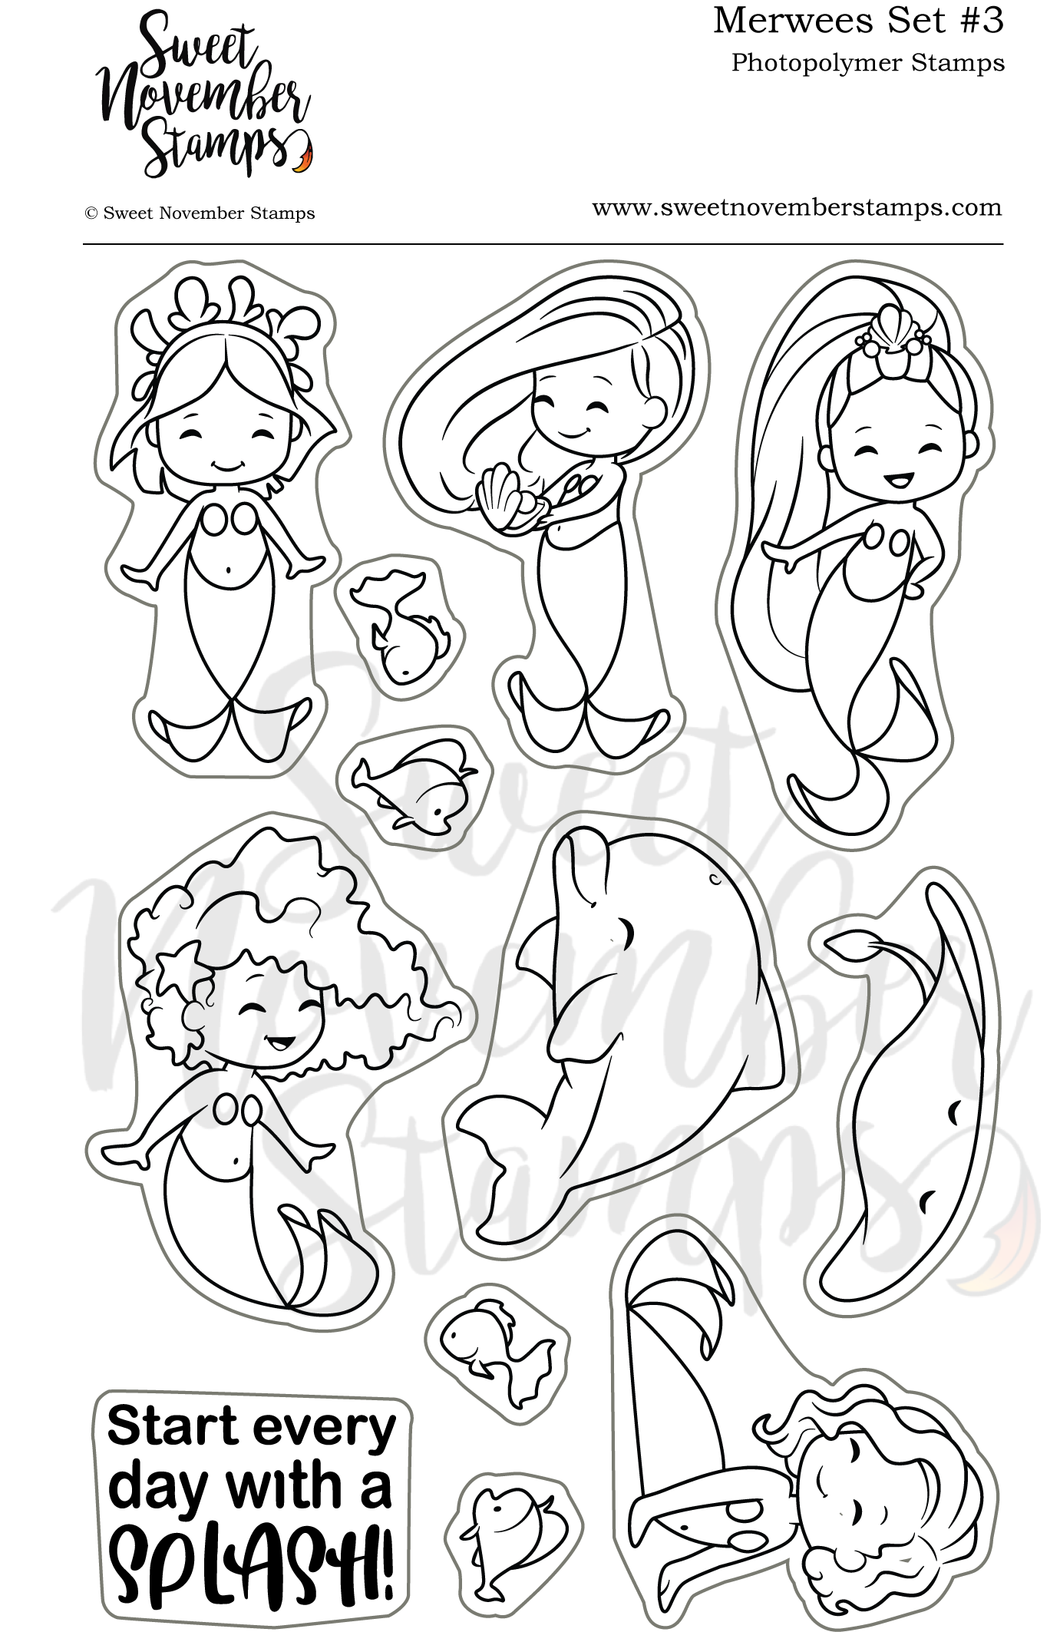 Clear Stamp Set - Merwees #3